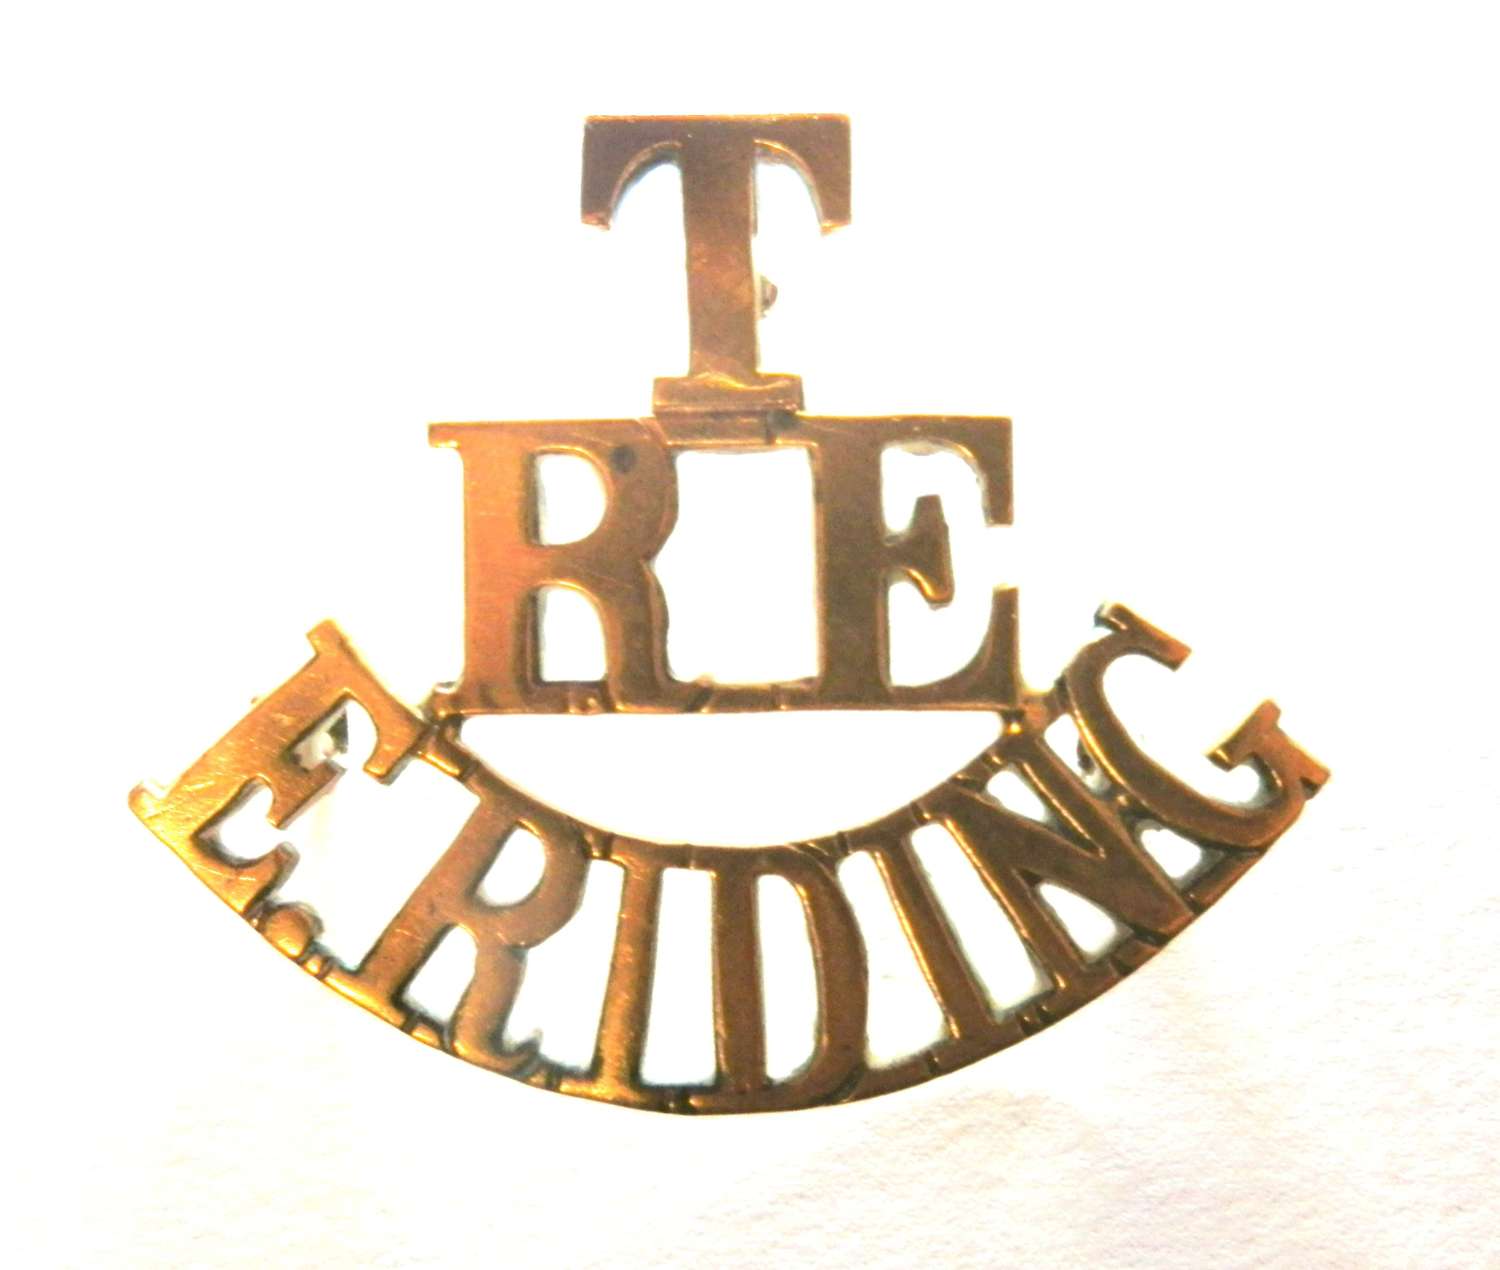 Territorial Royal Engineers East Riding Shoulder Title.